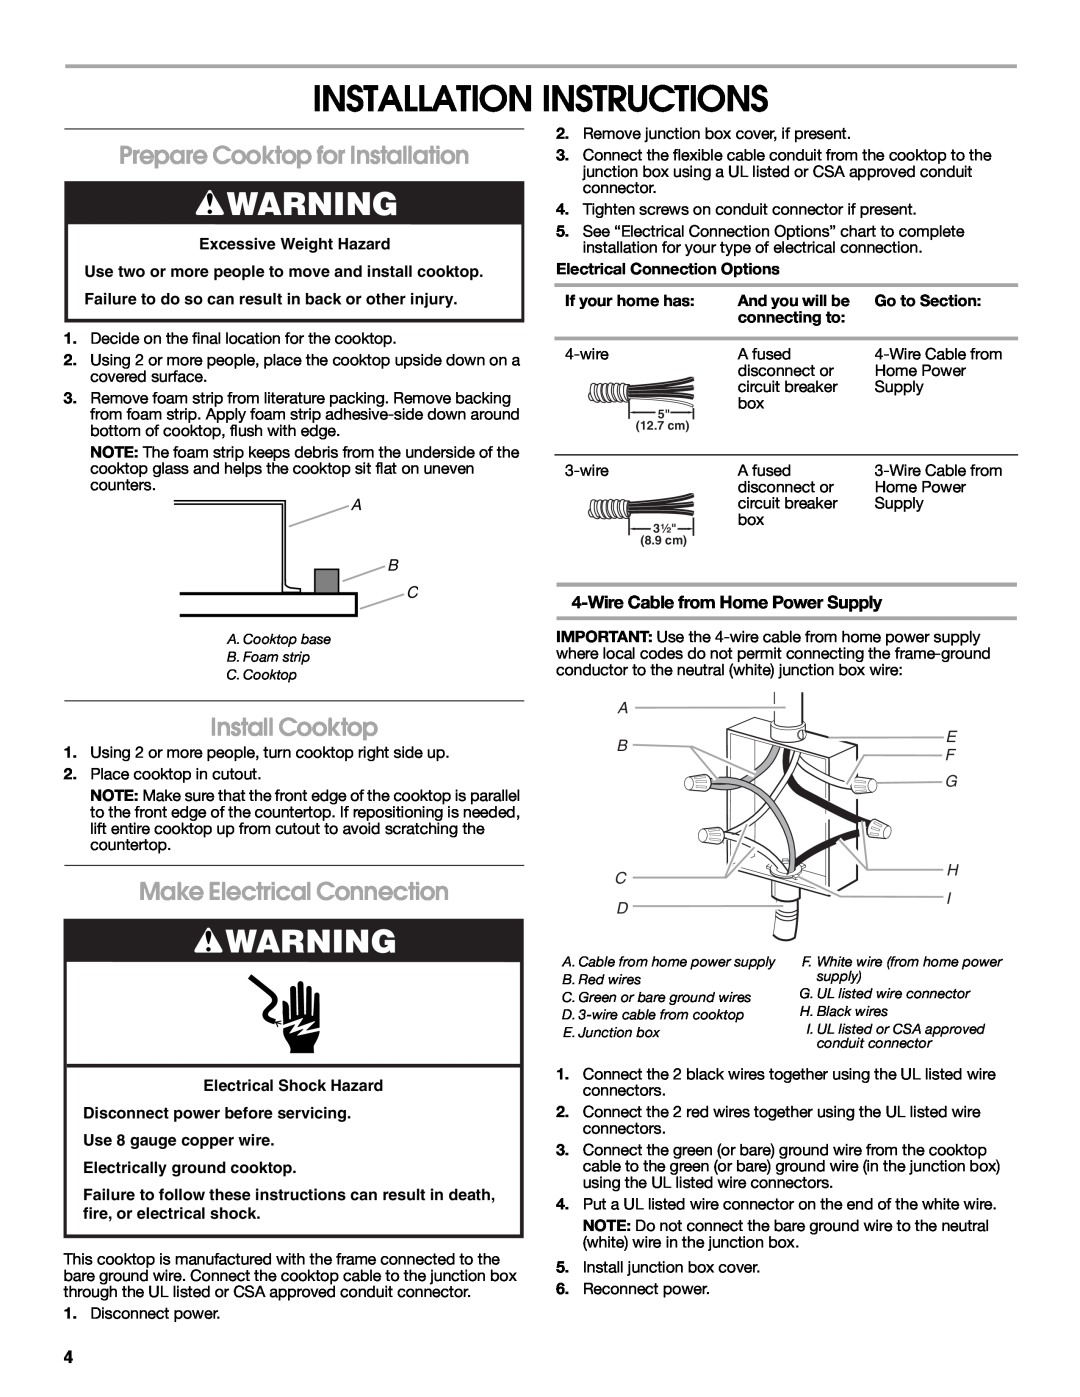 Maytag W10274255A Installation Instructions, Prepare Cooktop for Installation, Install Cooktop, Make Electrical Connection 